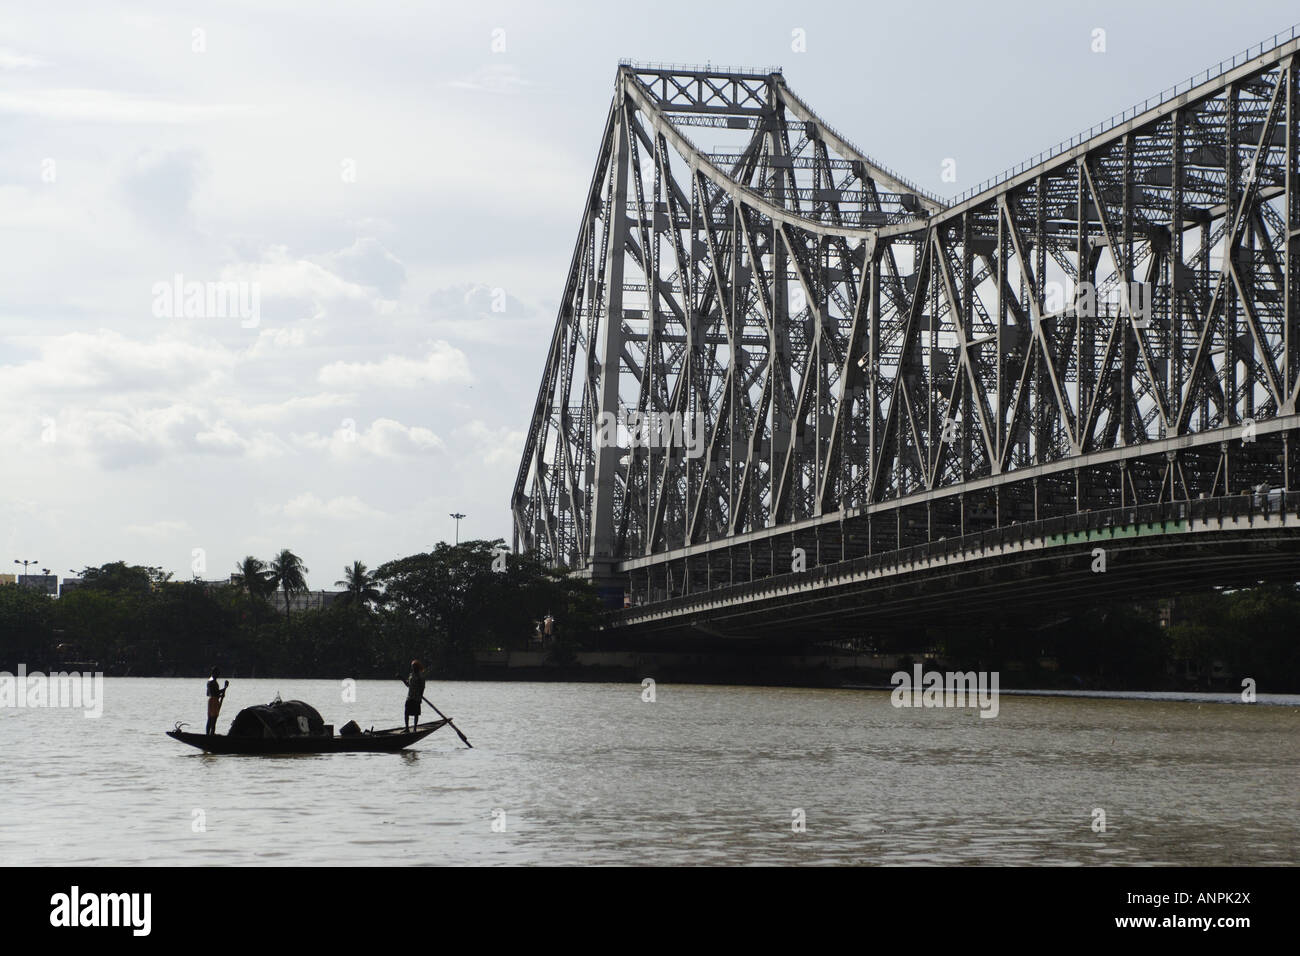 A rowing boat on the Hooghly River, near to the Howrah Bridge, in Kolkata, India. Stock Photo